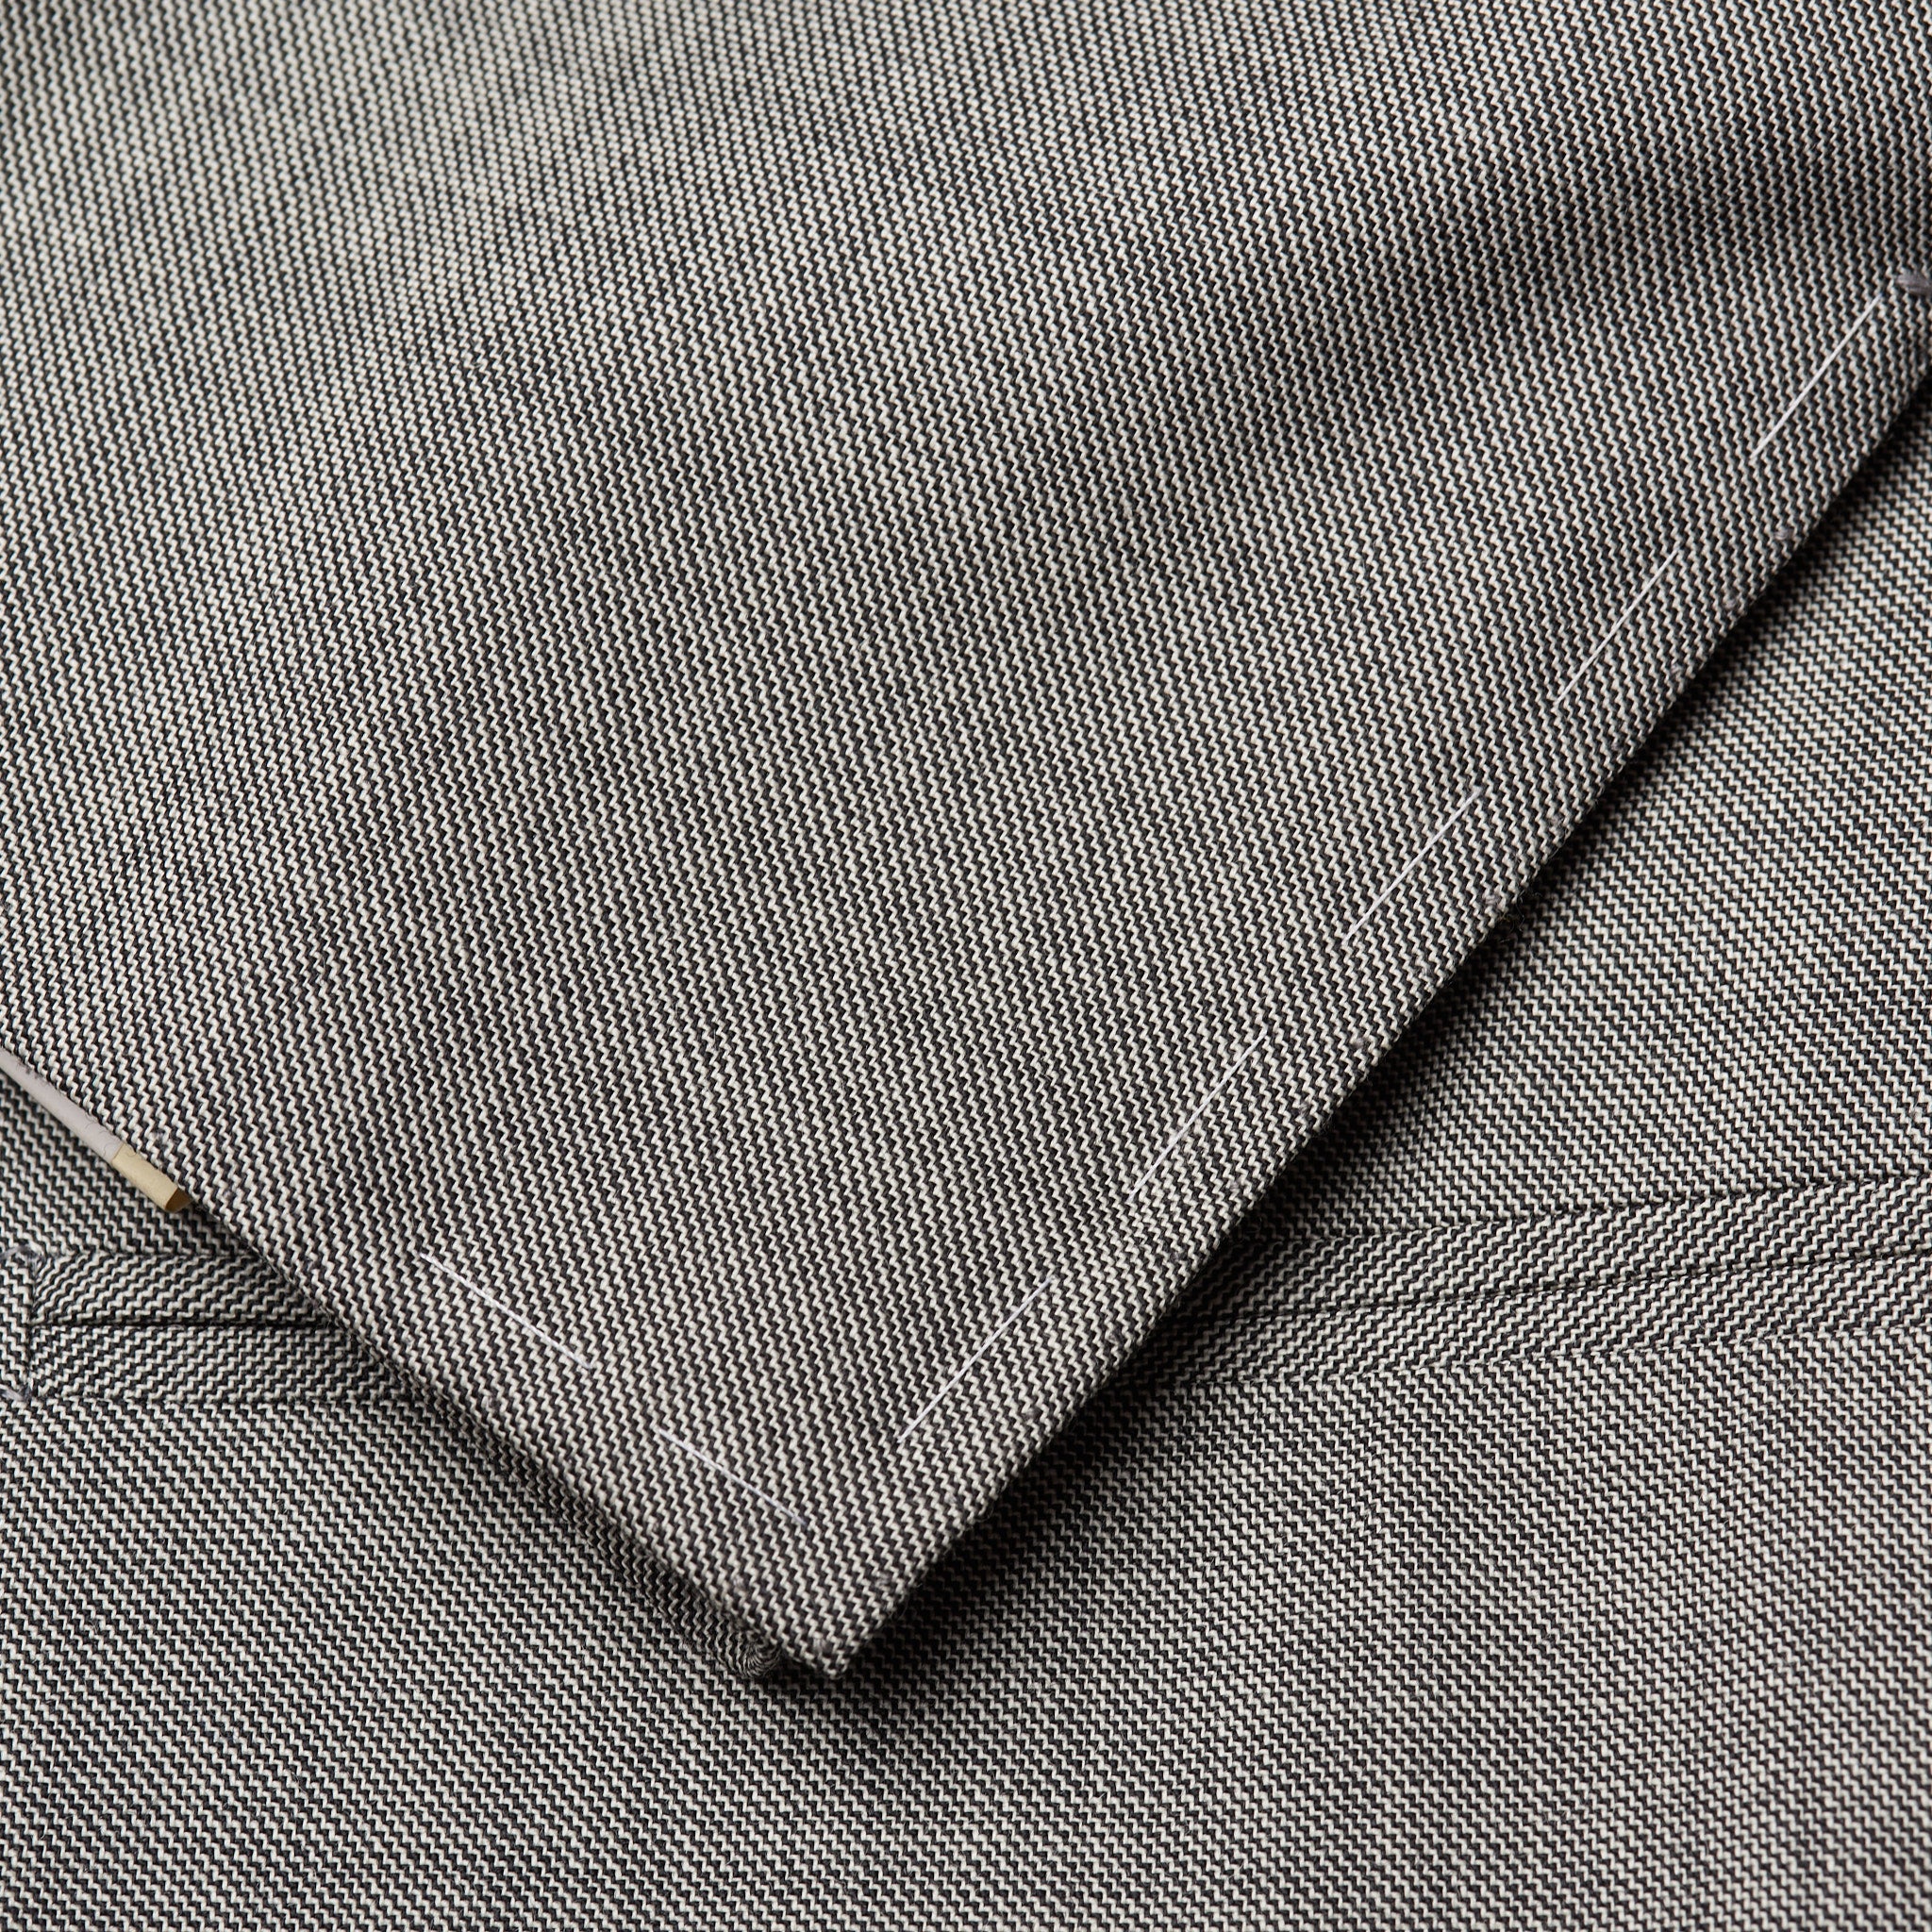 D'AVENZA Handmade Gray Wool Double Breasted Suit EU 52 NEW US 42 D'AVENZA